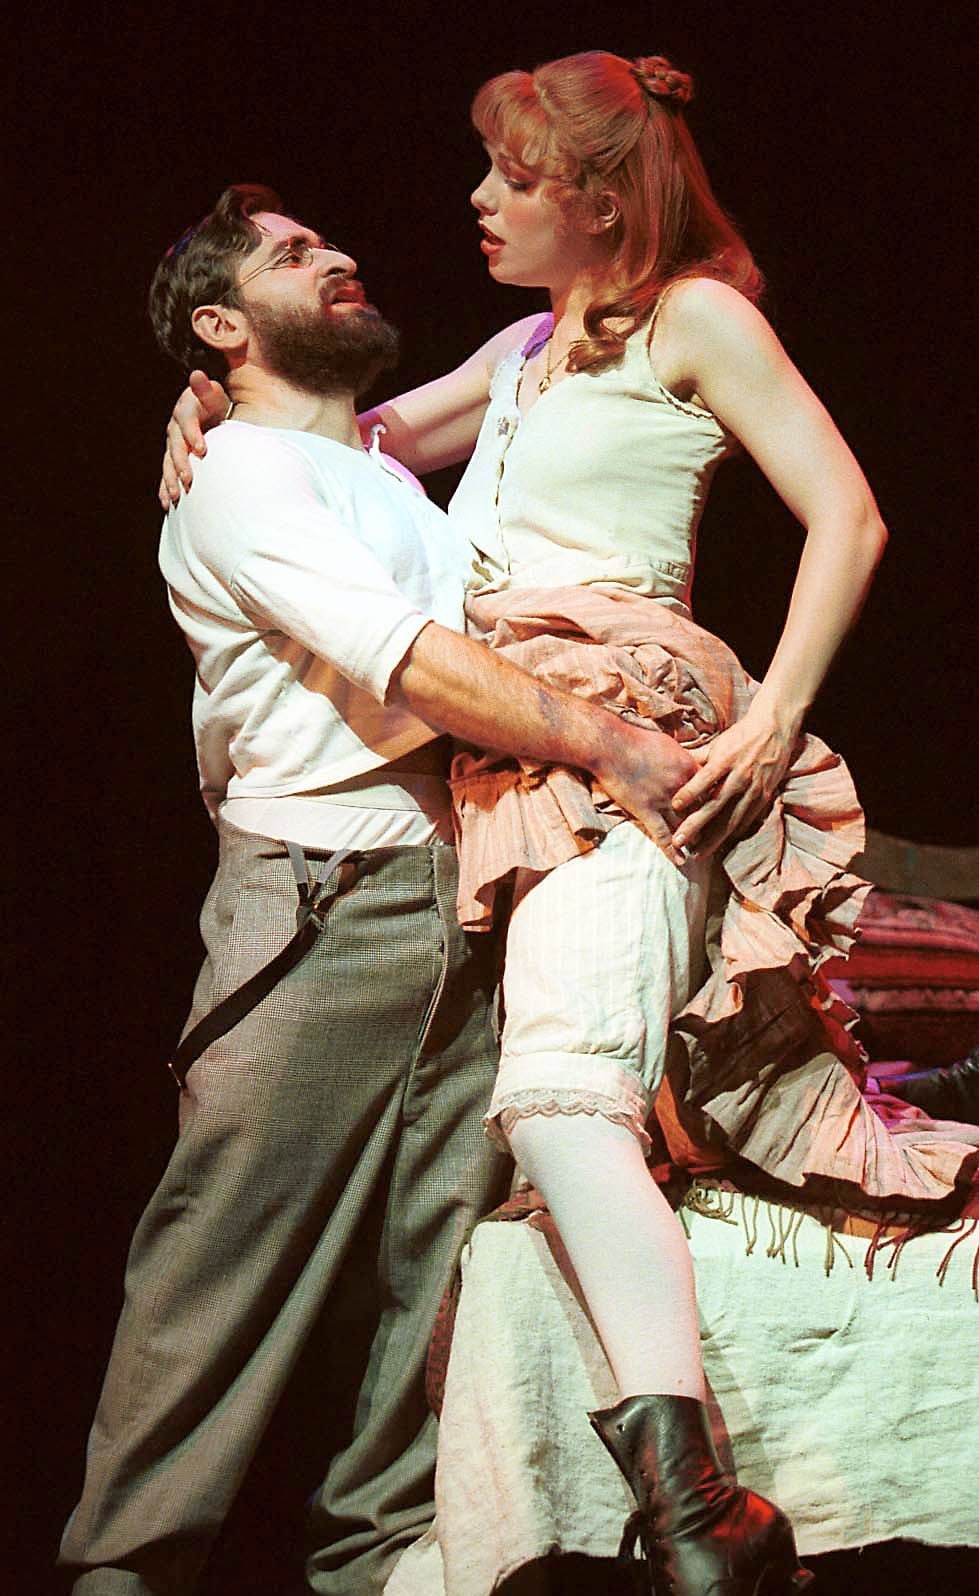 Hannah Waddingham and Sevan Stephan in the musical Lautrec at the Shaftsbury Theatre